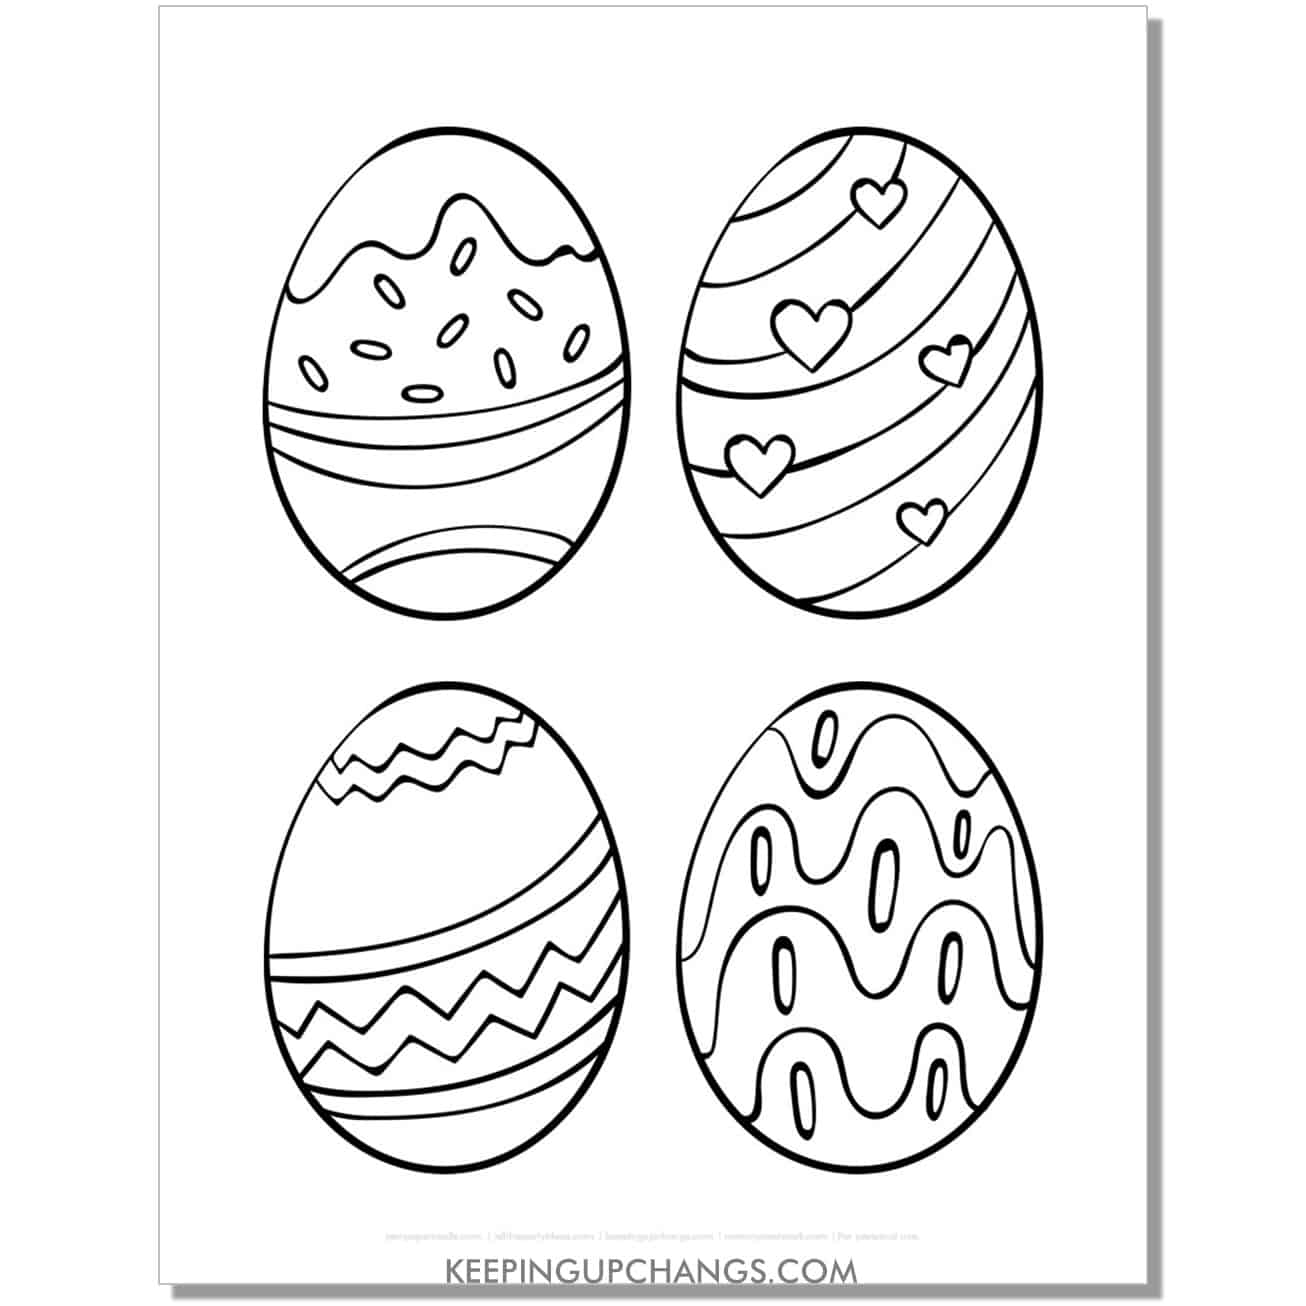 free medium easter eggs with hearts, zigzag, sprinkles coloring page, sheet.